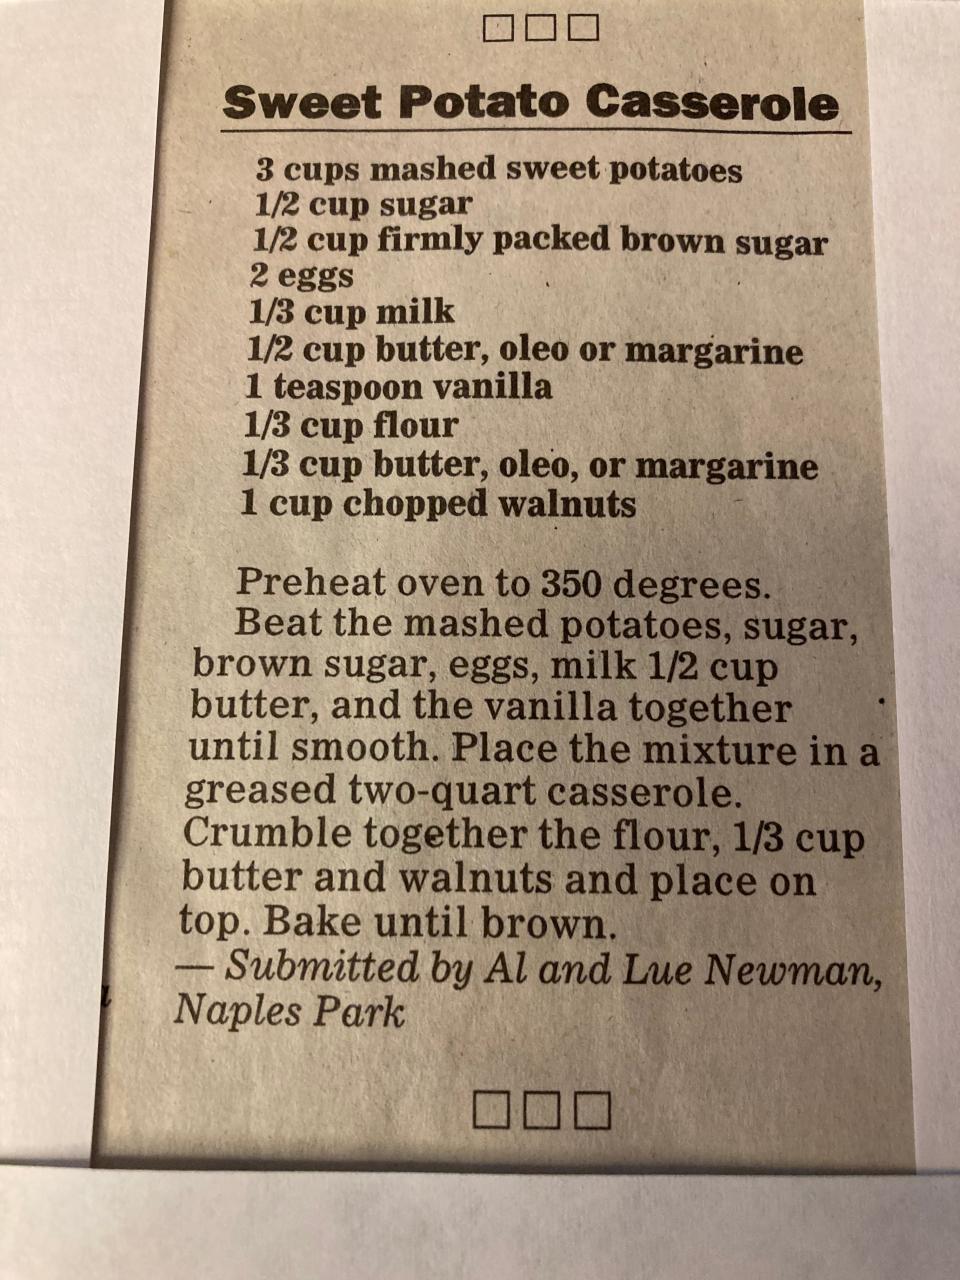 The original sweet potato casserole recipe Naylor cut out of the Bonita Banner, provided by Al and Lue Newman of Naples Park.